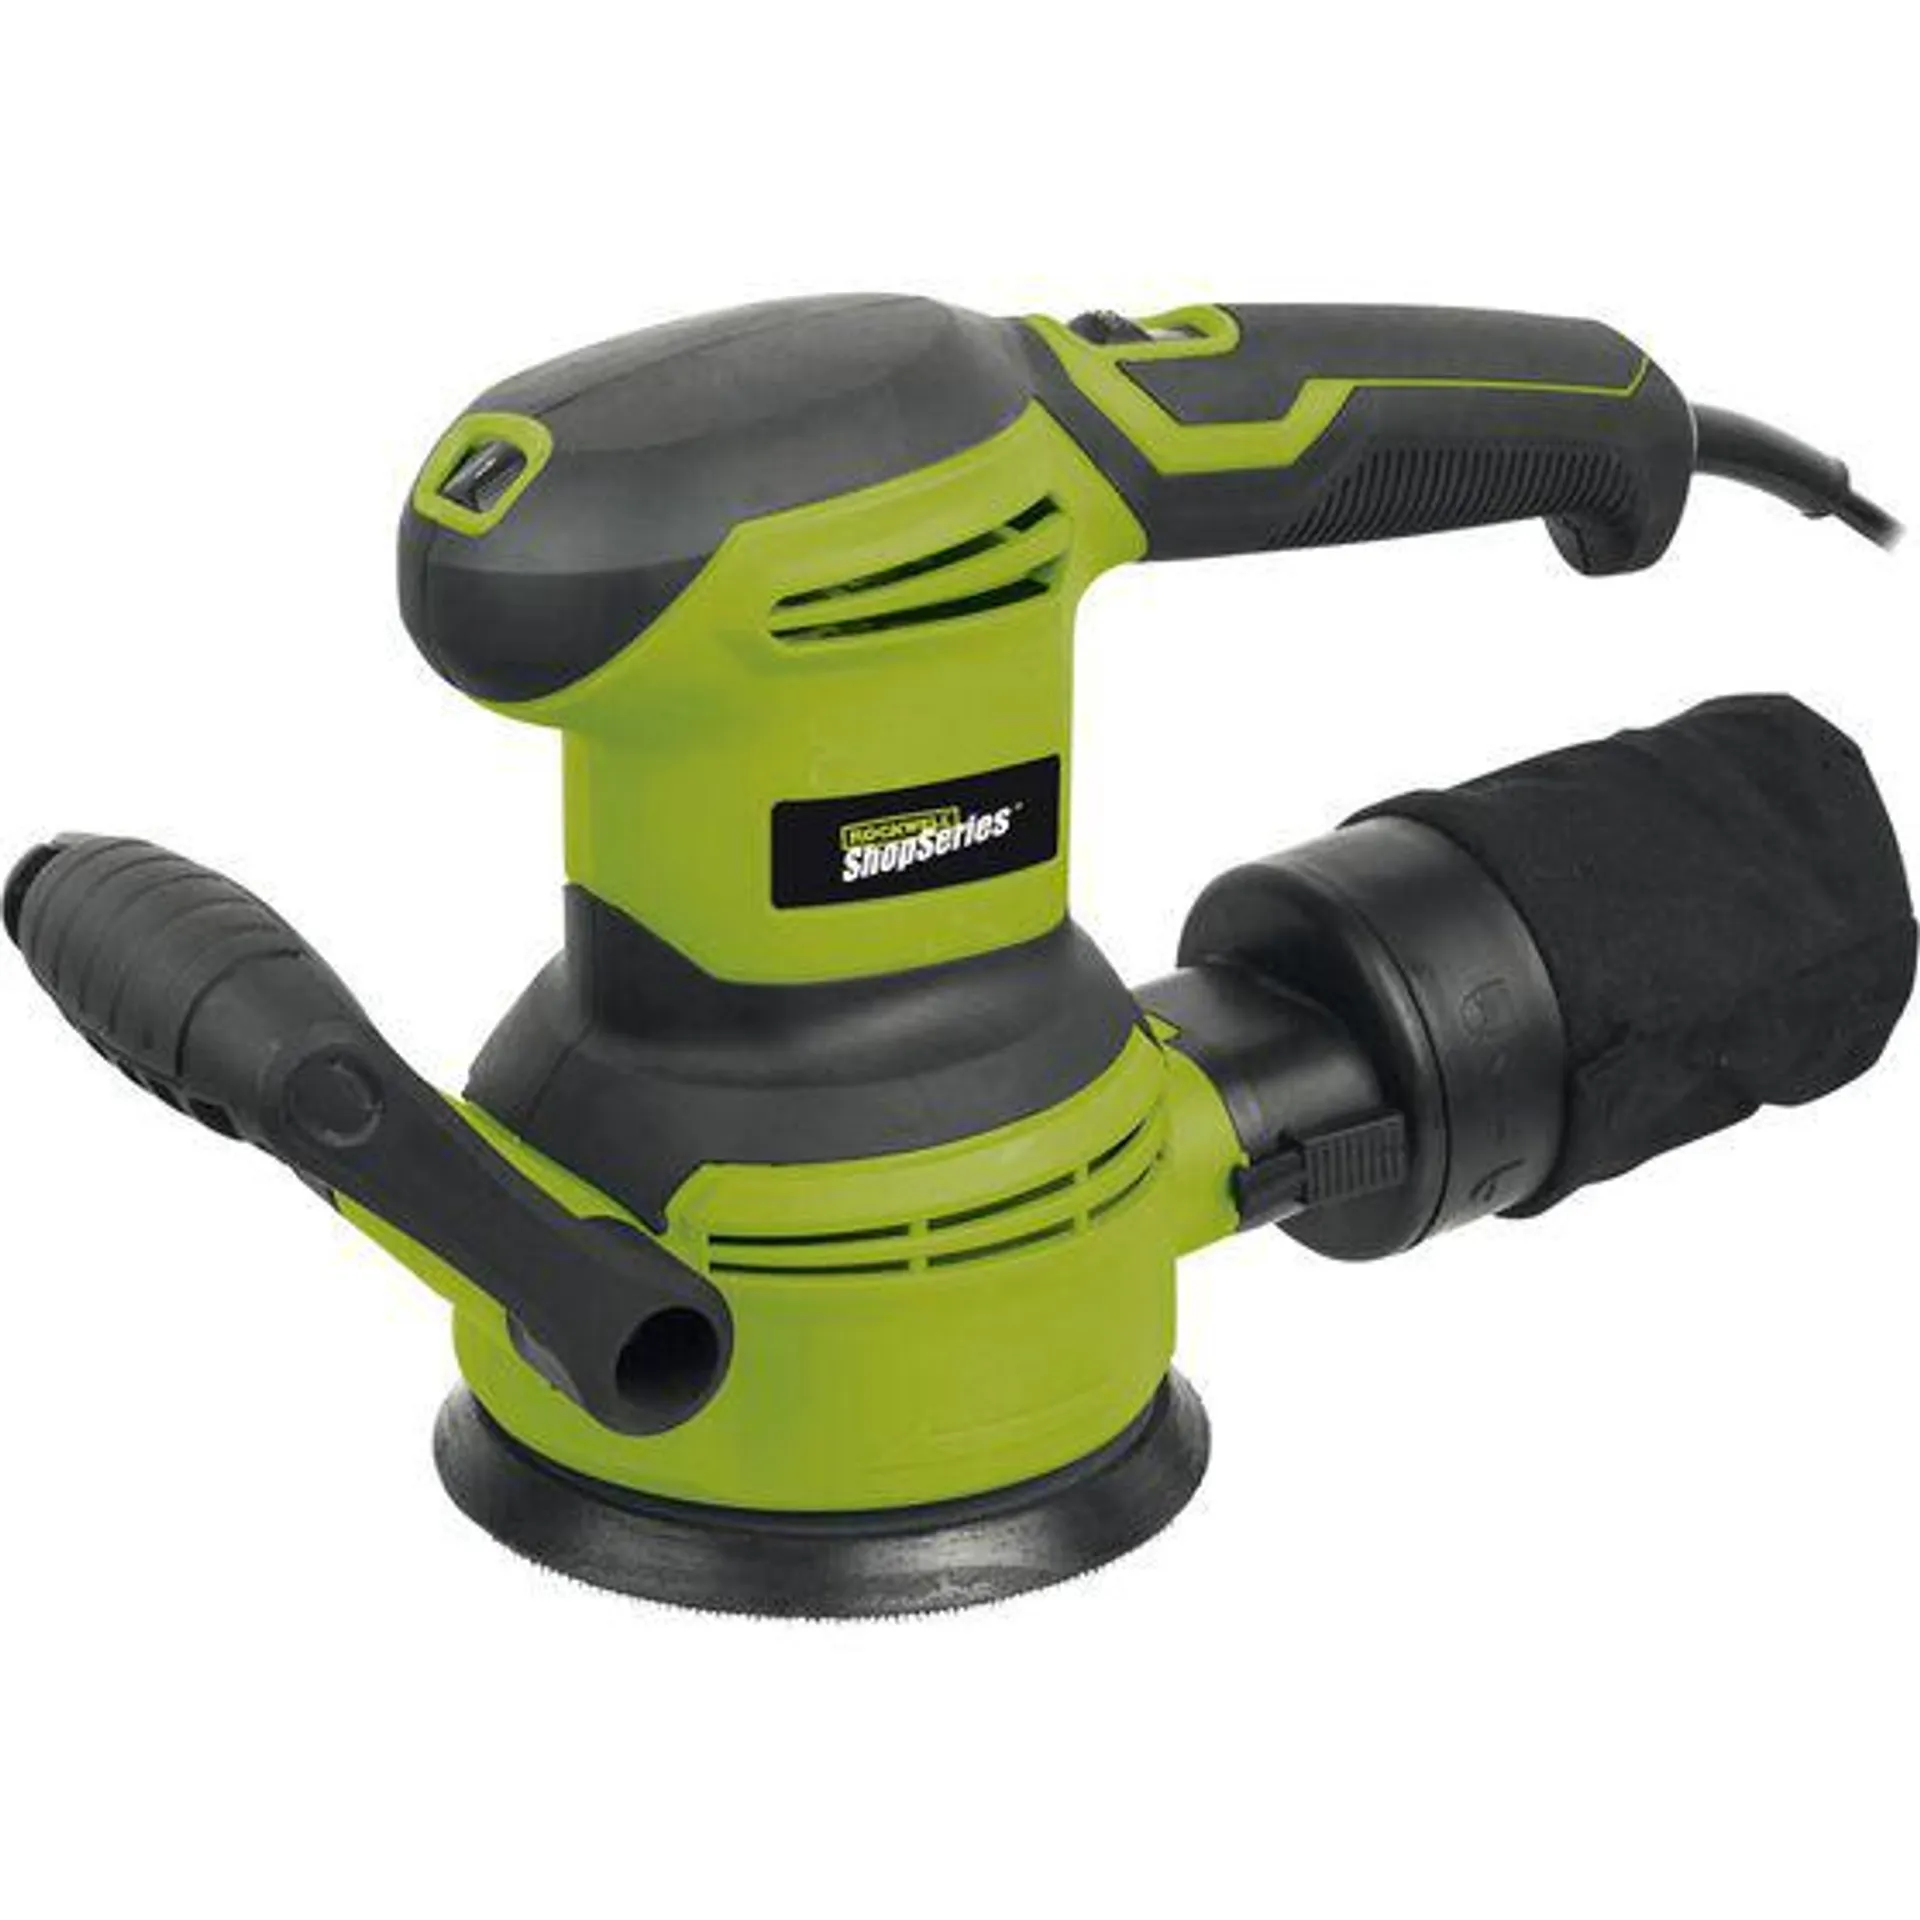 Rockwell ShopSeries Rotary Sander 400W